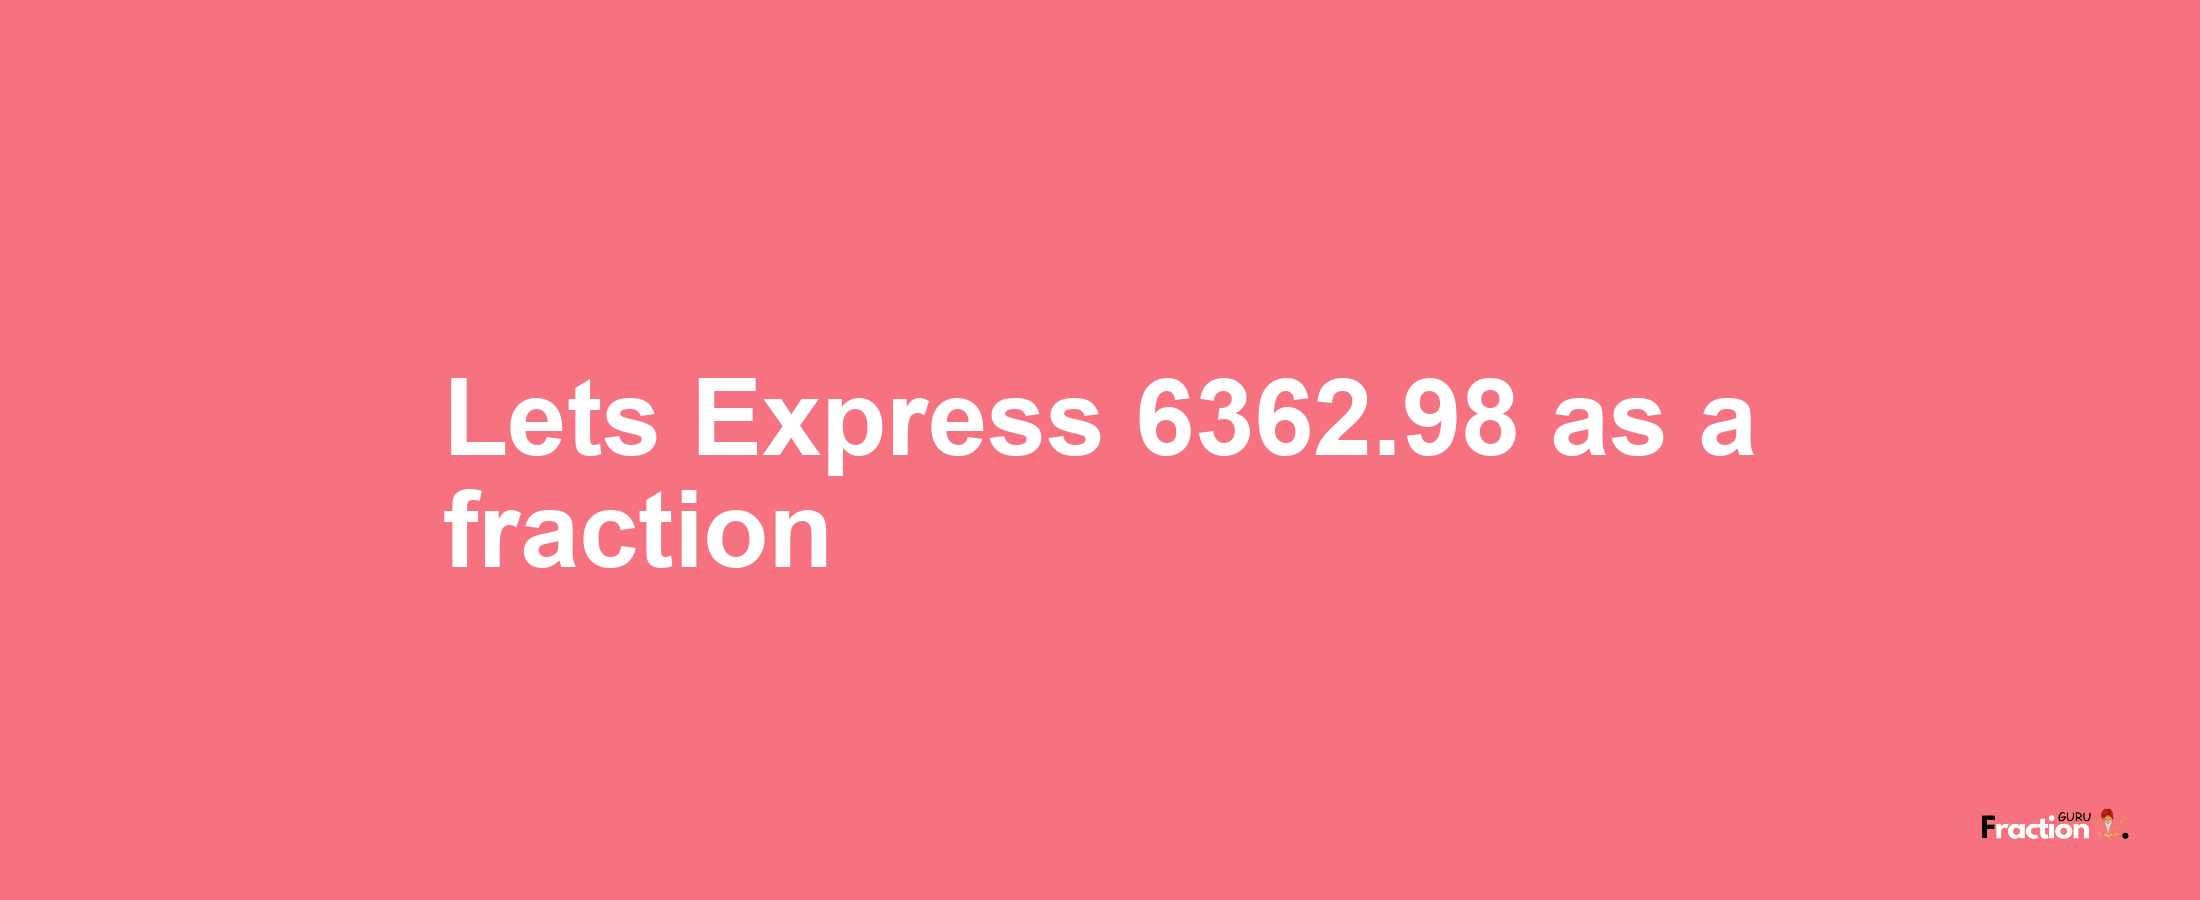 Lets Express 6362.98 as afraction